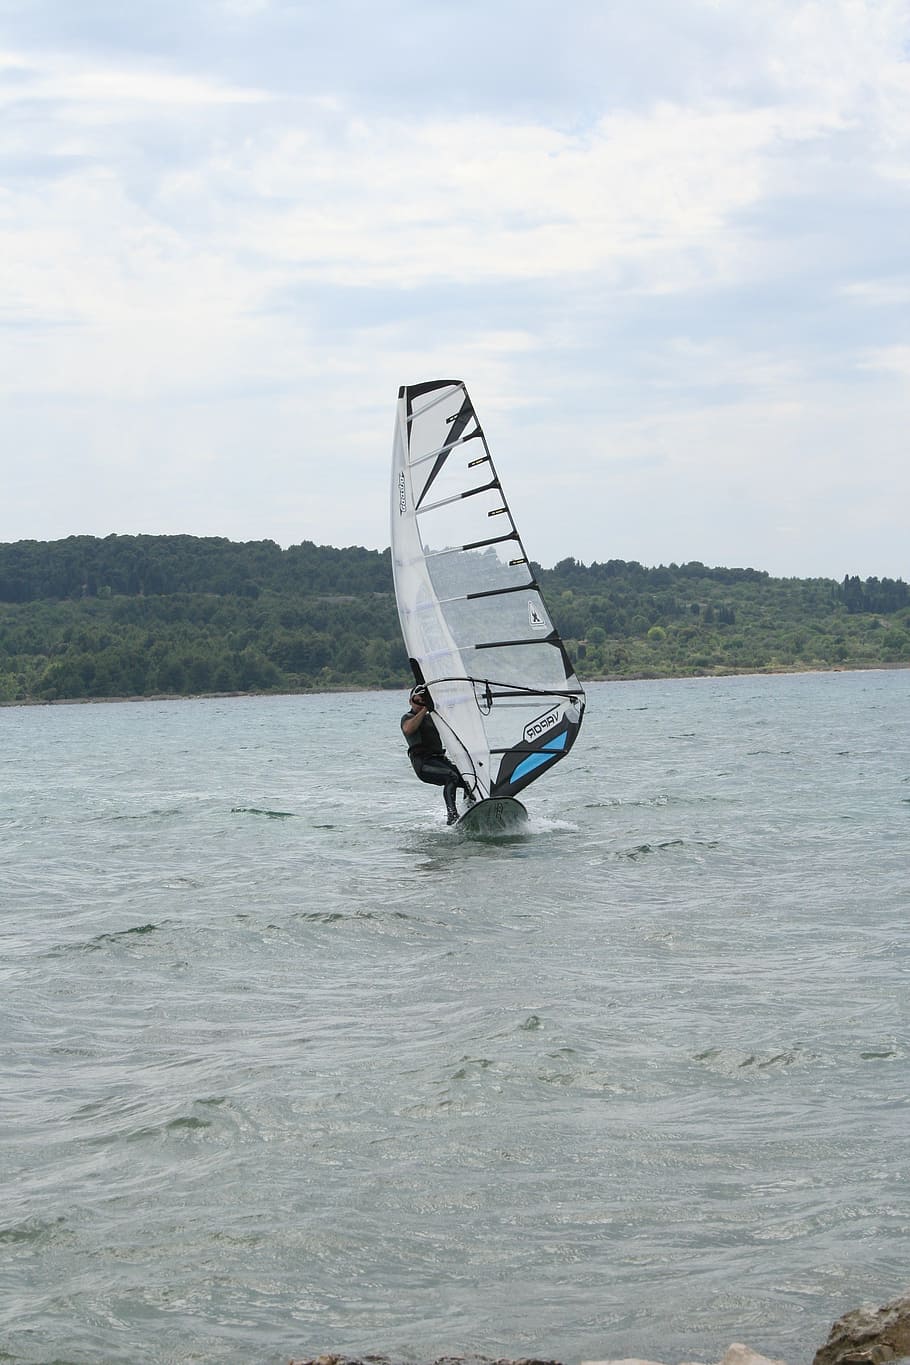 windsurfing, surfer, sail, water, waterfront, sea, beauty in nature, sky, cloud - sky, nature